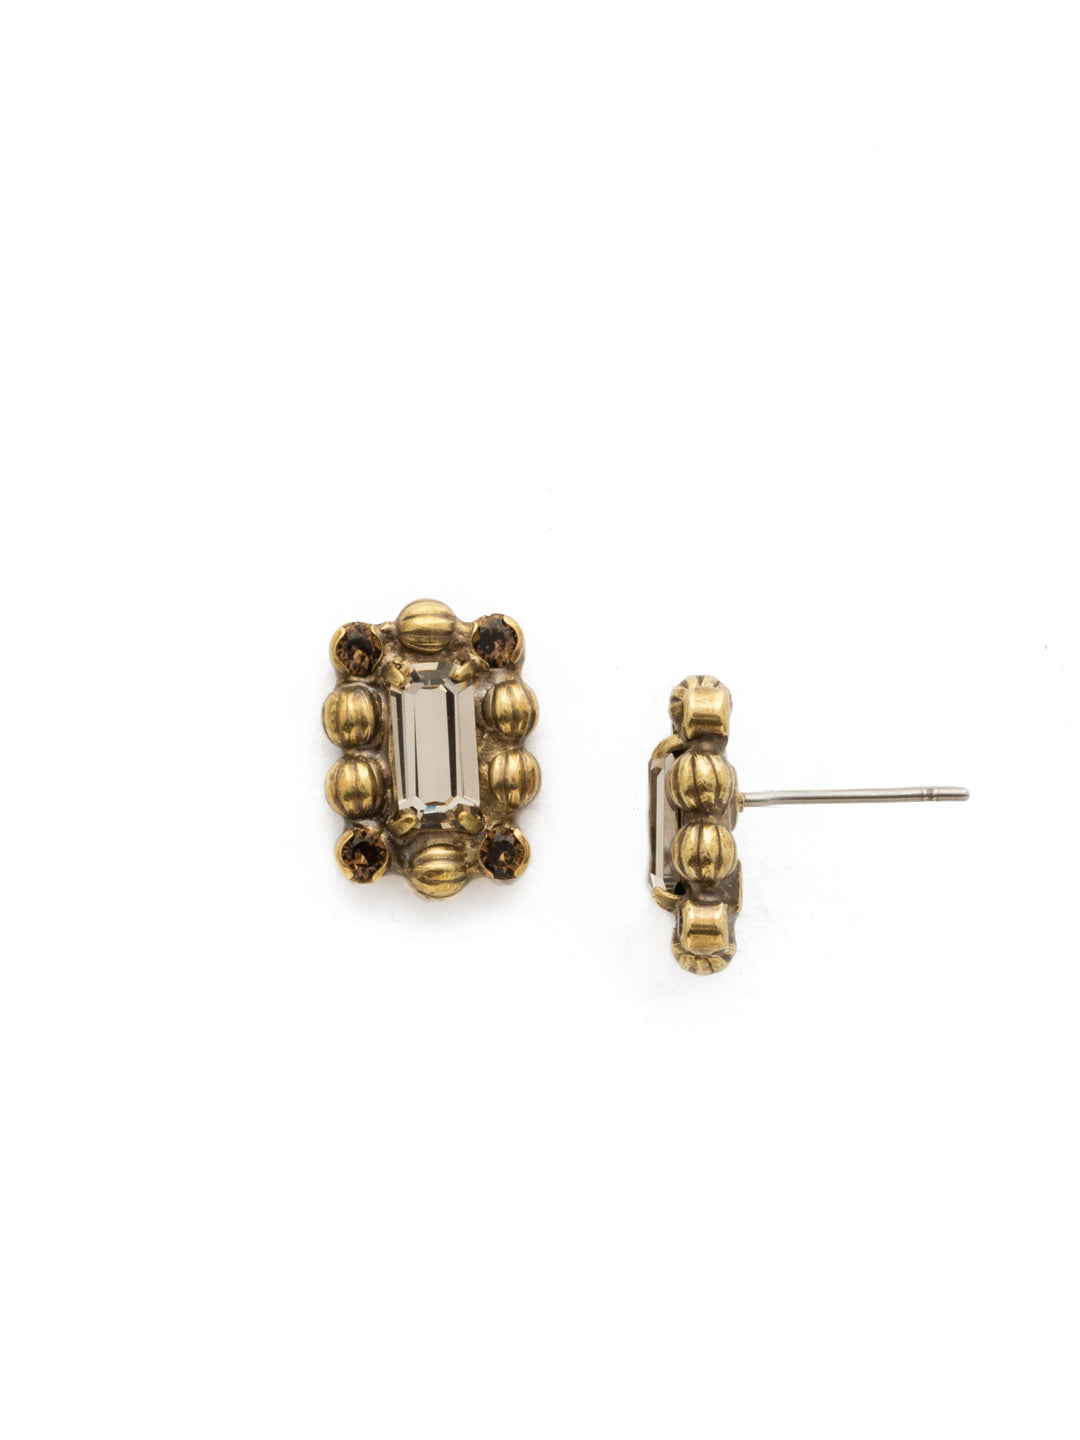 Senecia Earring - EDX28AGSTN - <p>This stud earing features a small baguette stone laid in metal detail highlighted by round crystals in the corners. From Sorrelli's Sandstone collection in our Antique Gold-tone finish.</p>